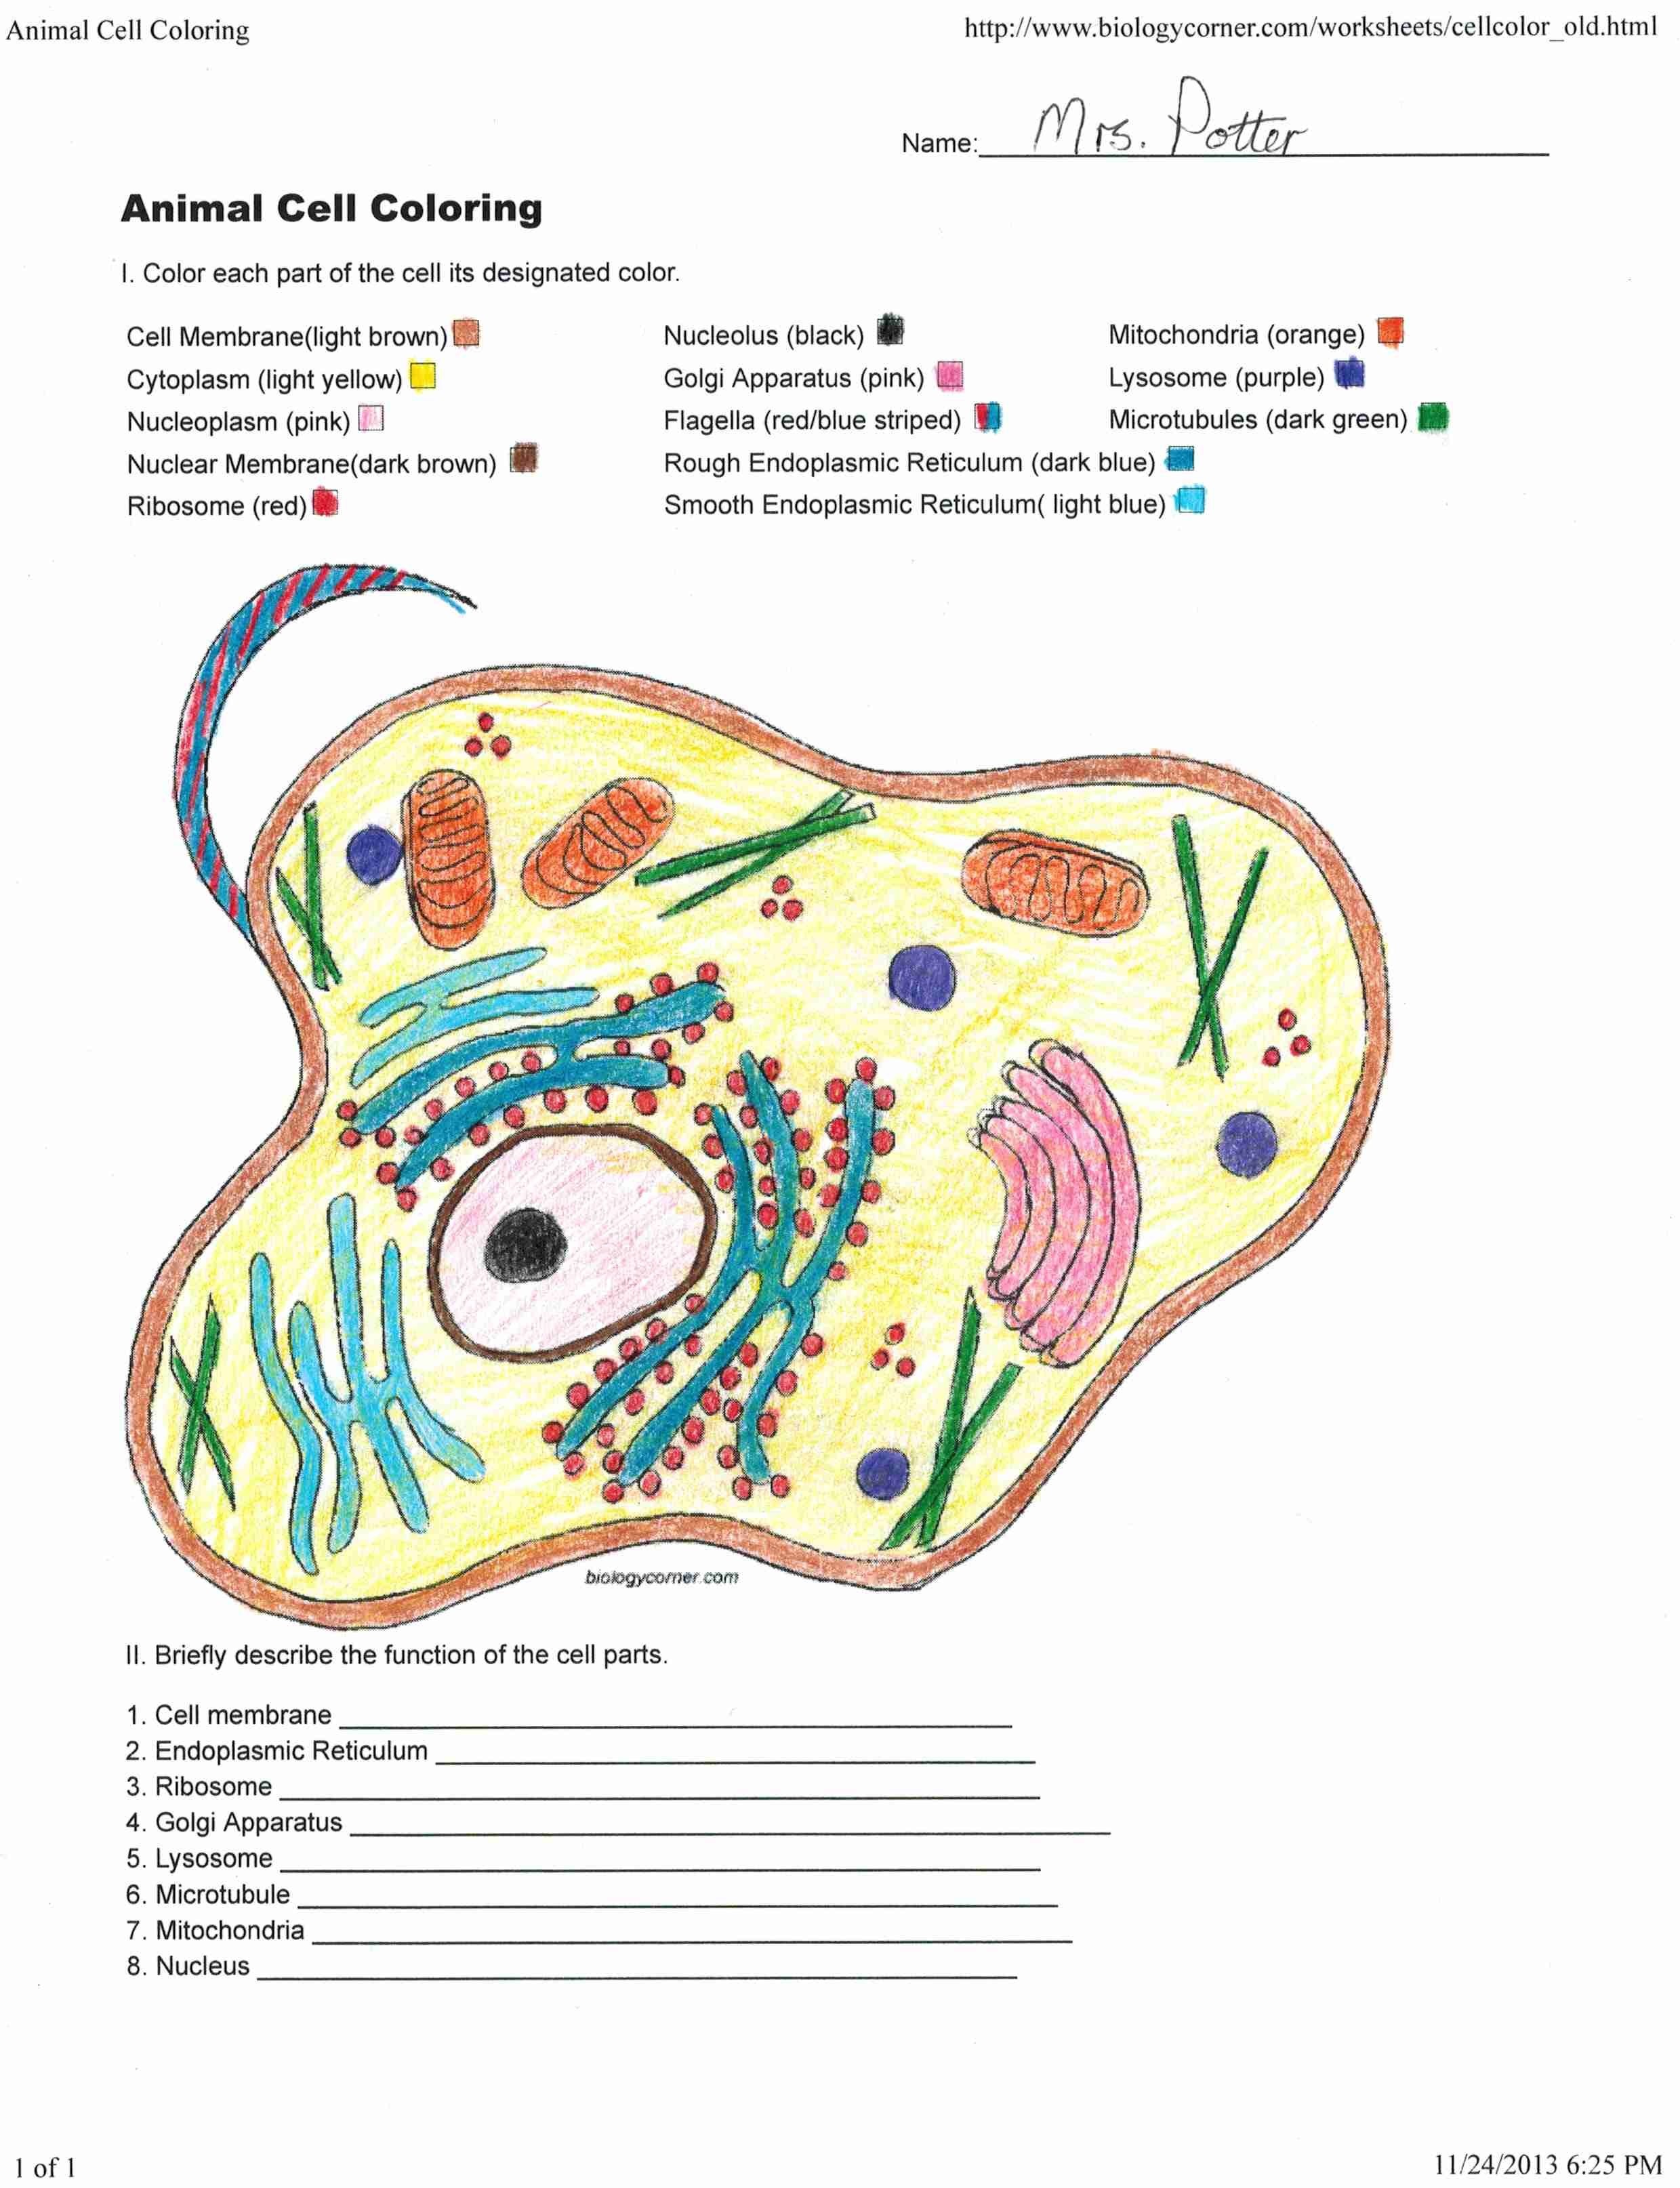 Animal Cell Coloring Page 3